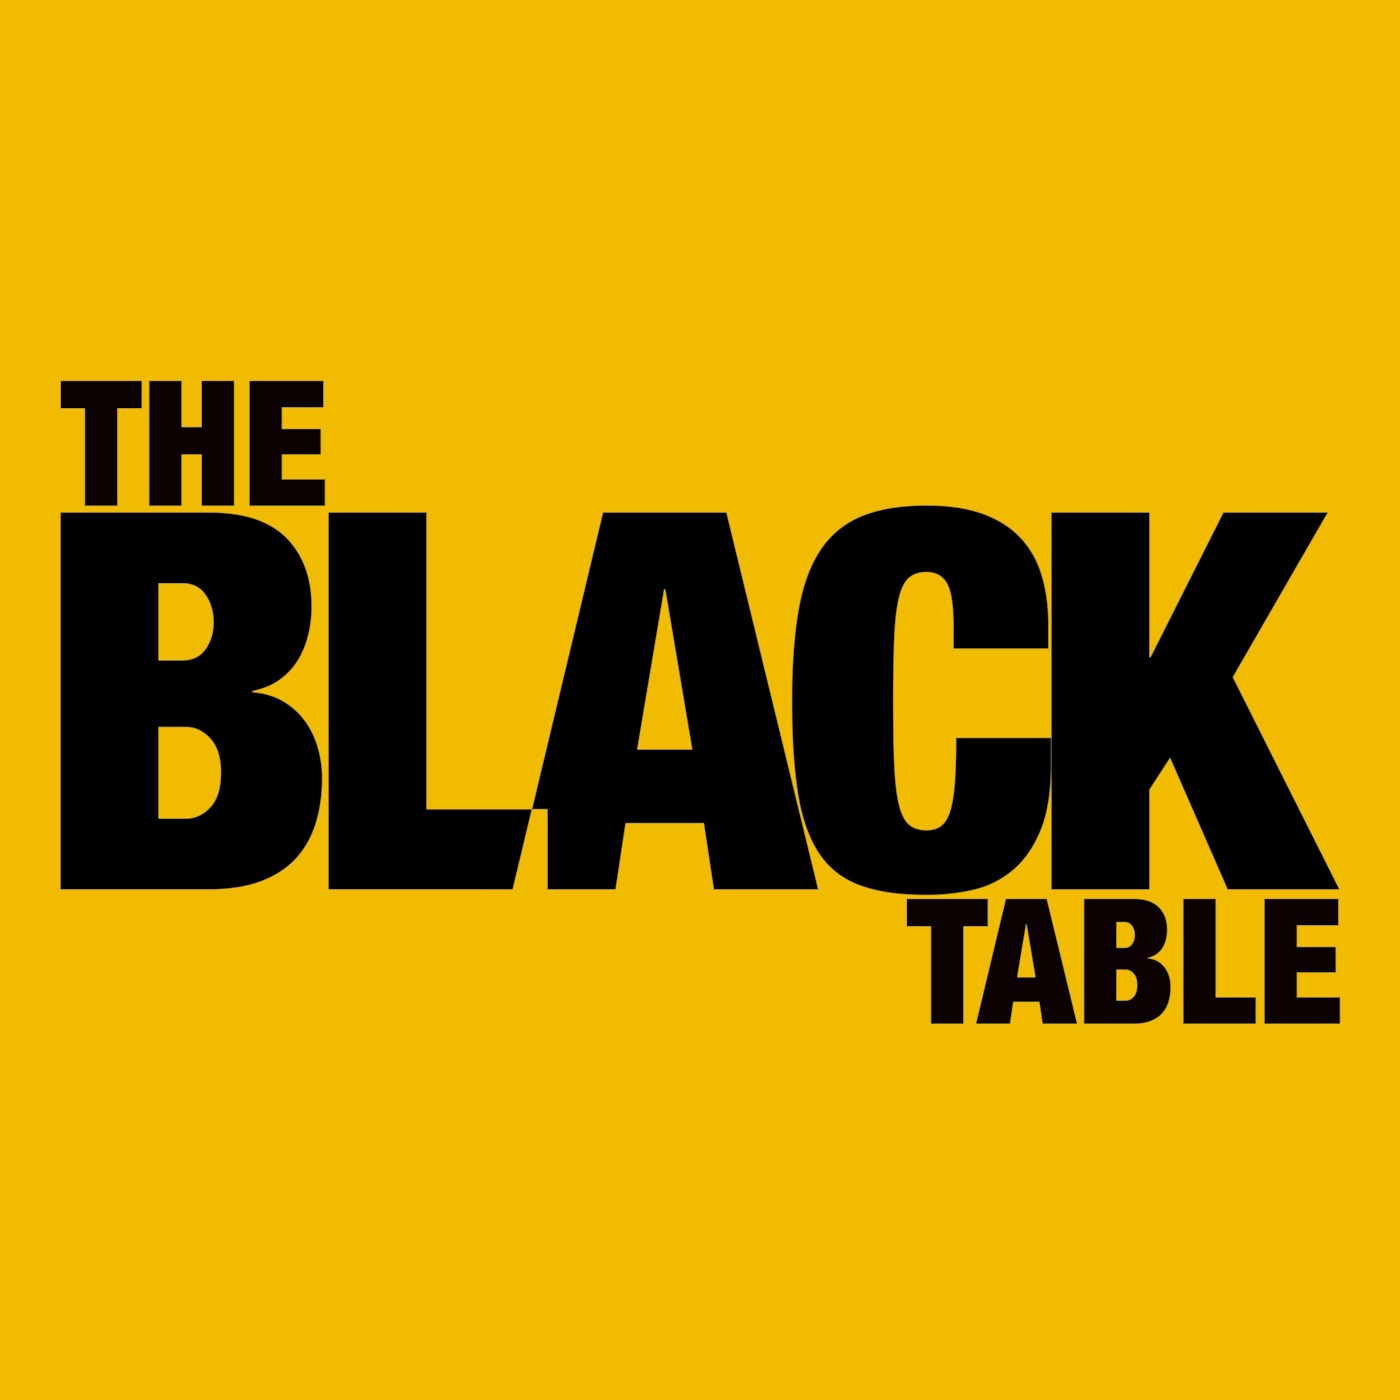 Ep. 19 | George Bush Doesn’t Care About The Black Table